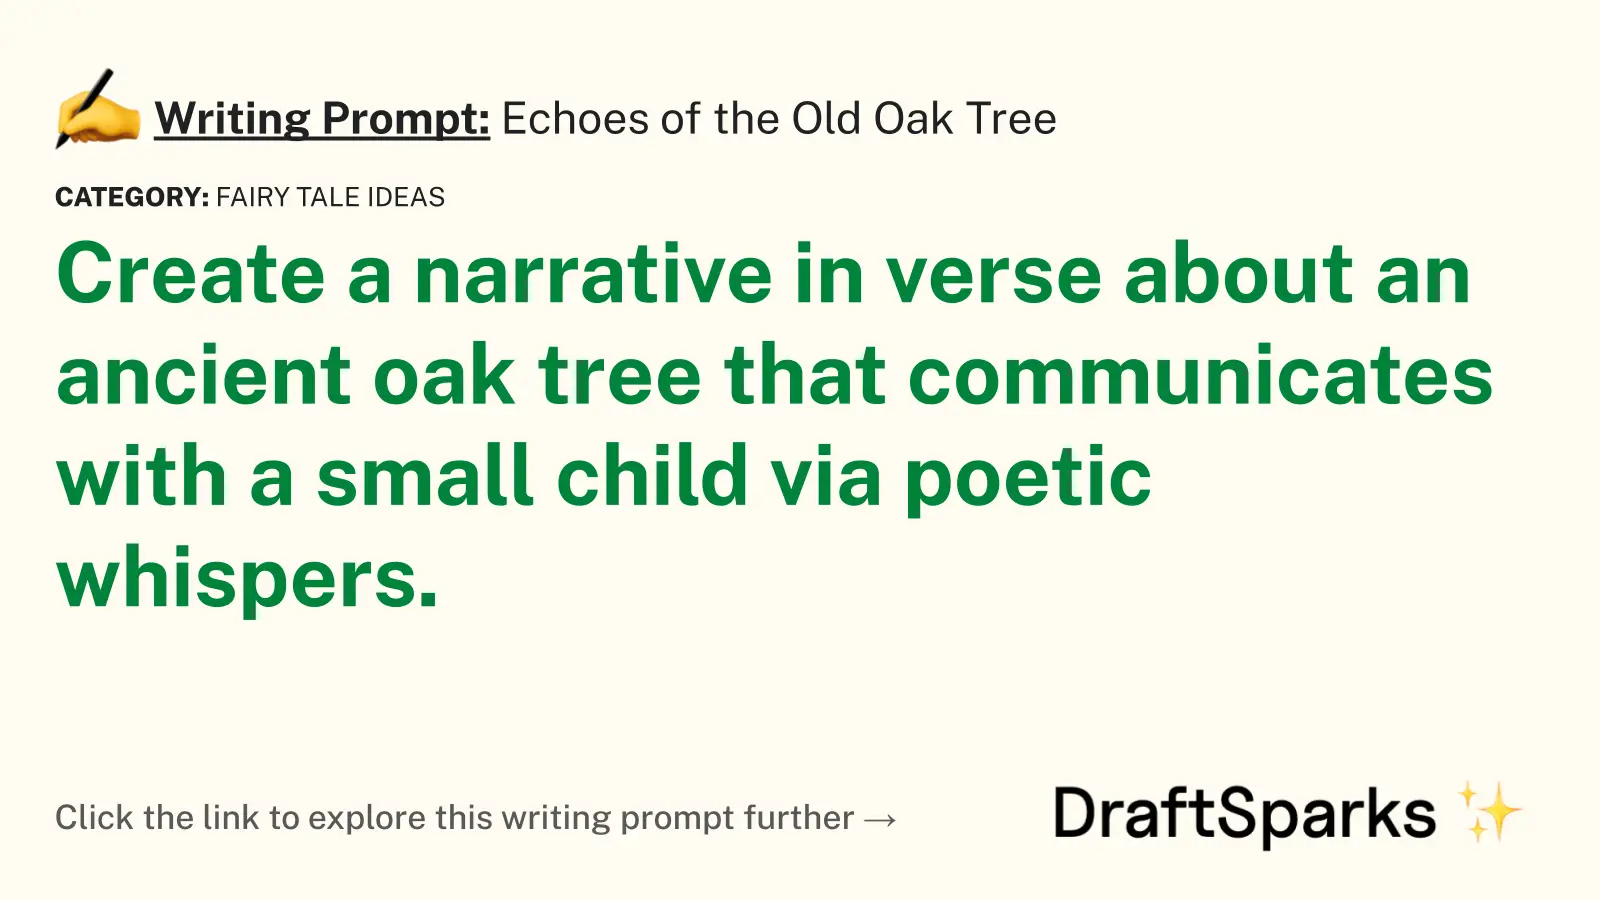 Echoes of the Old Oak Tree